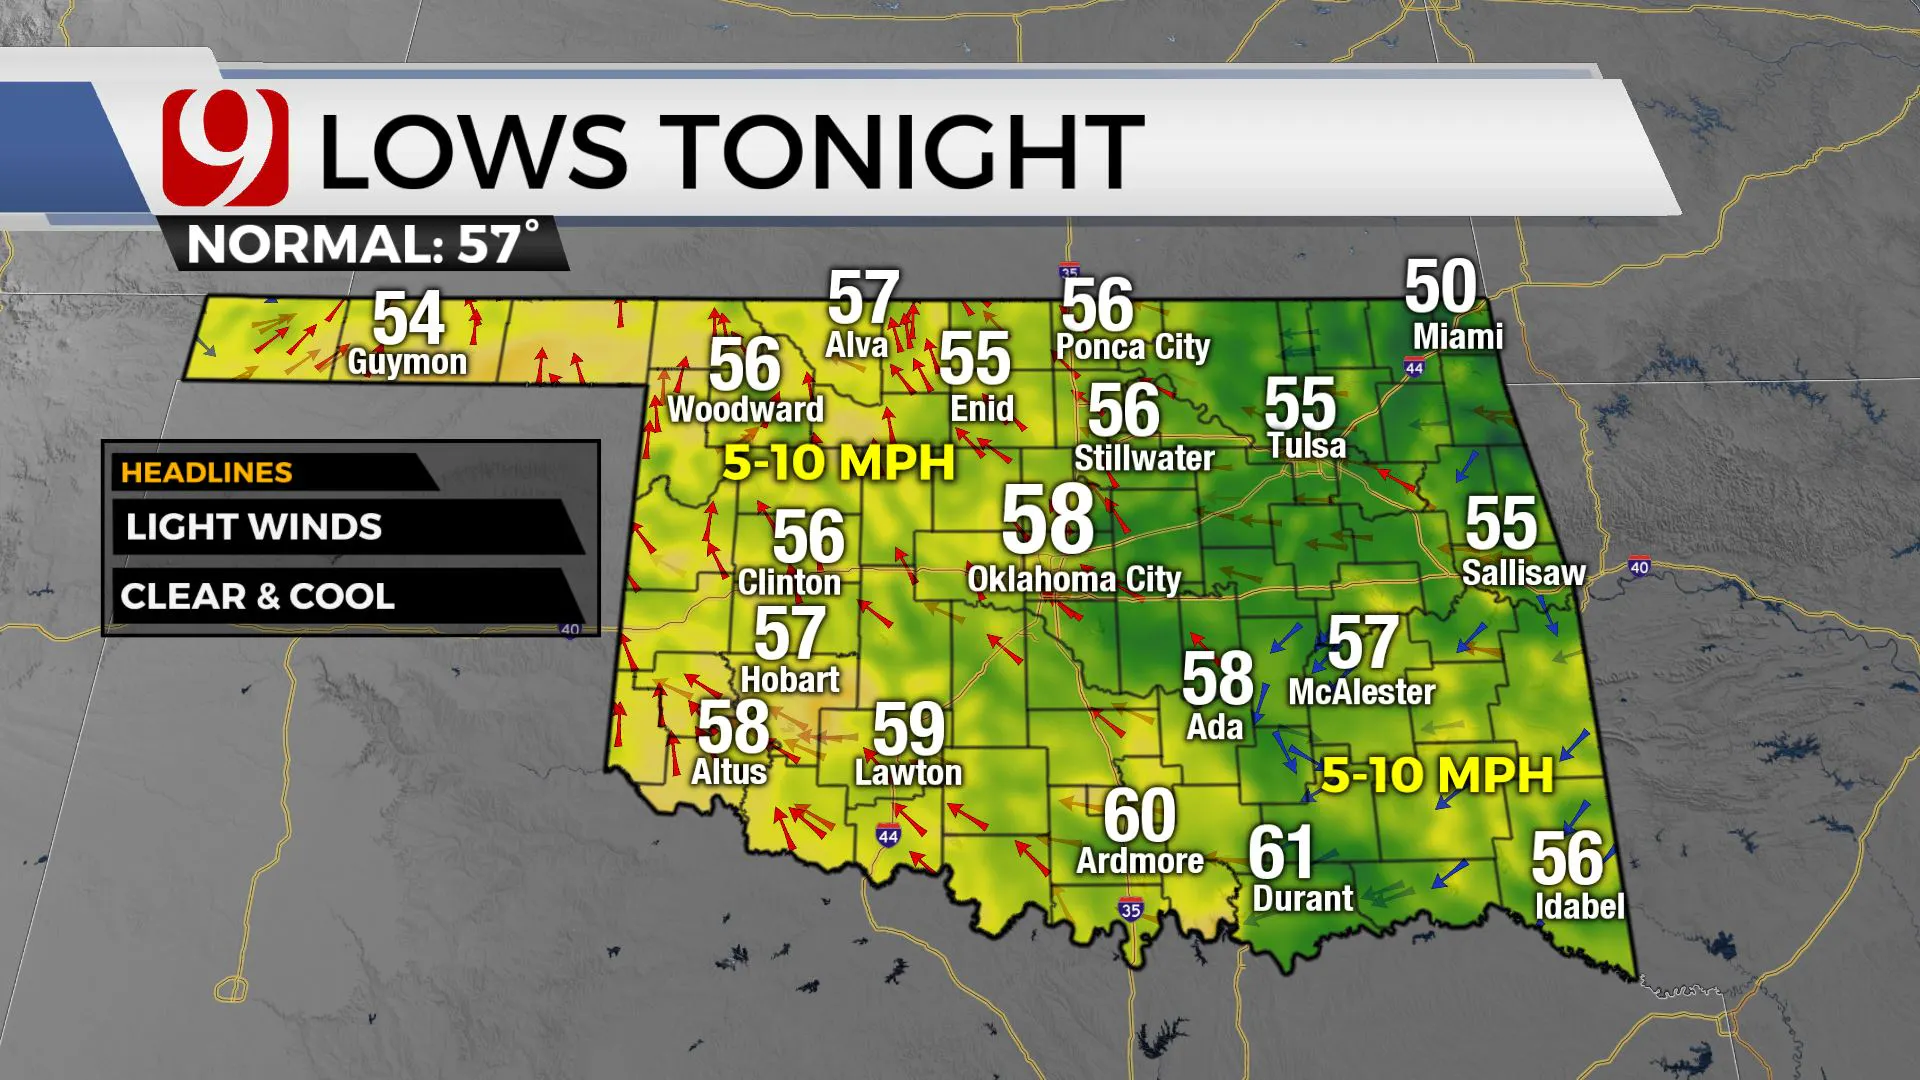 Low temps for tonight across the state.